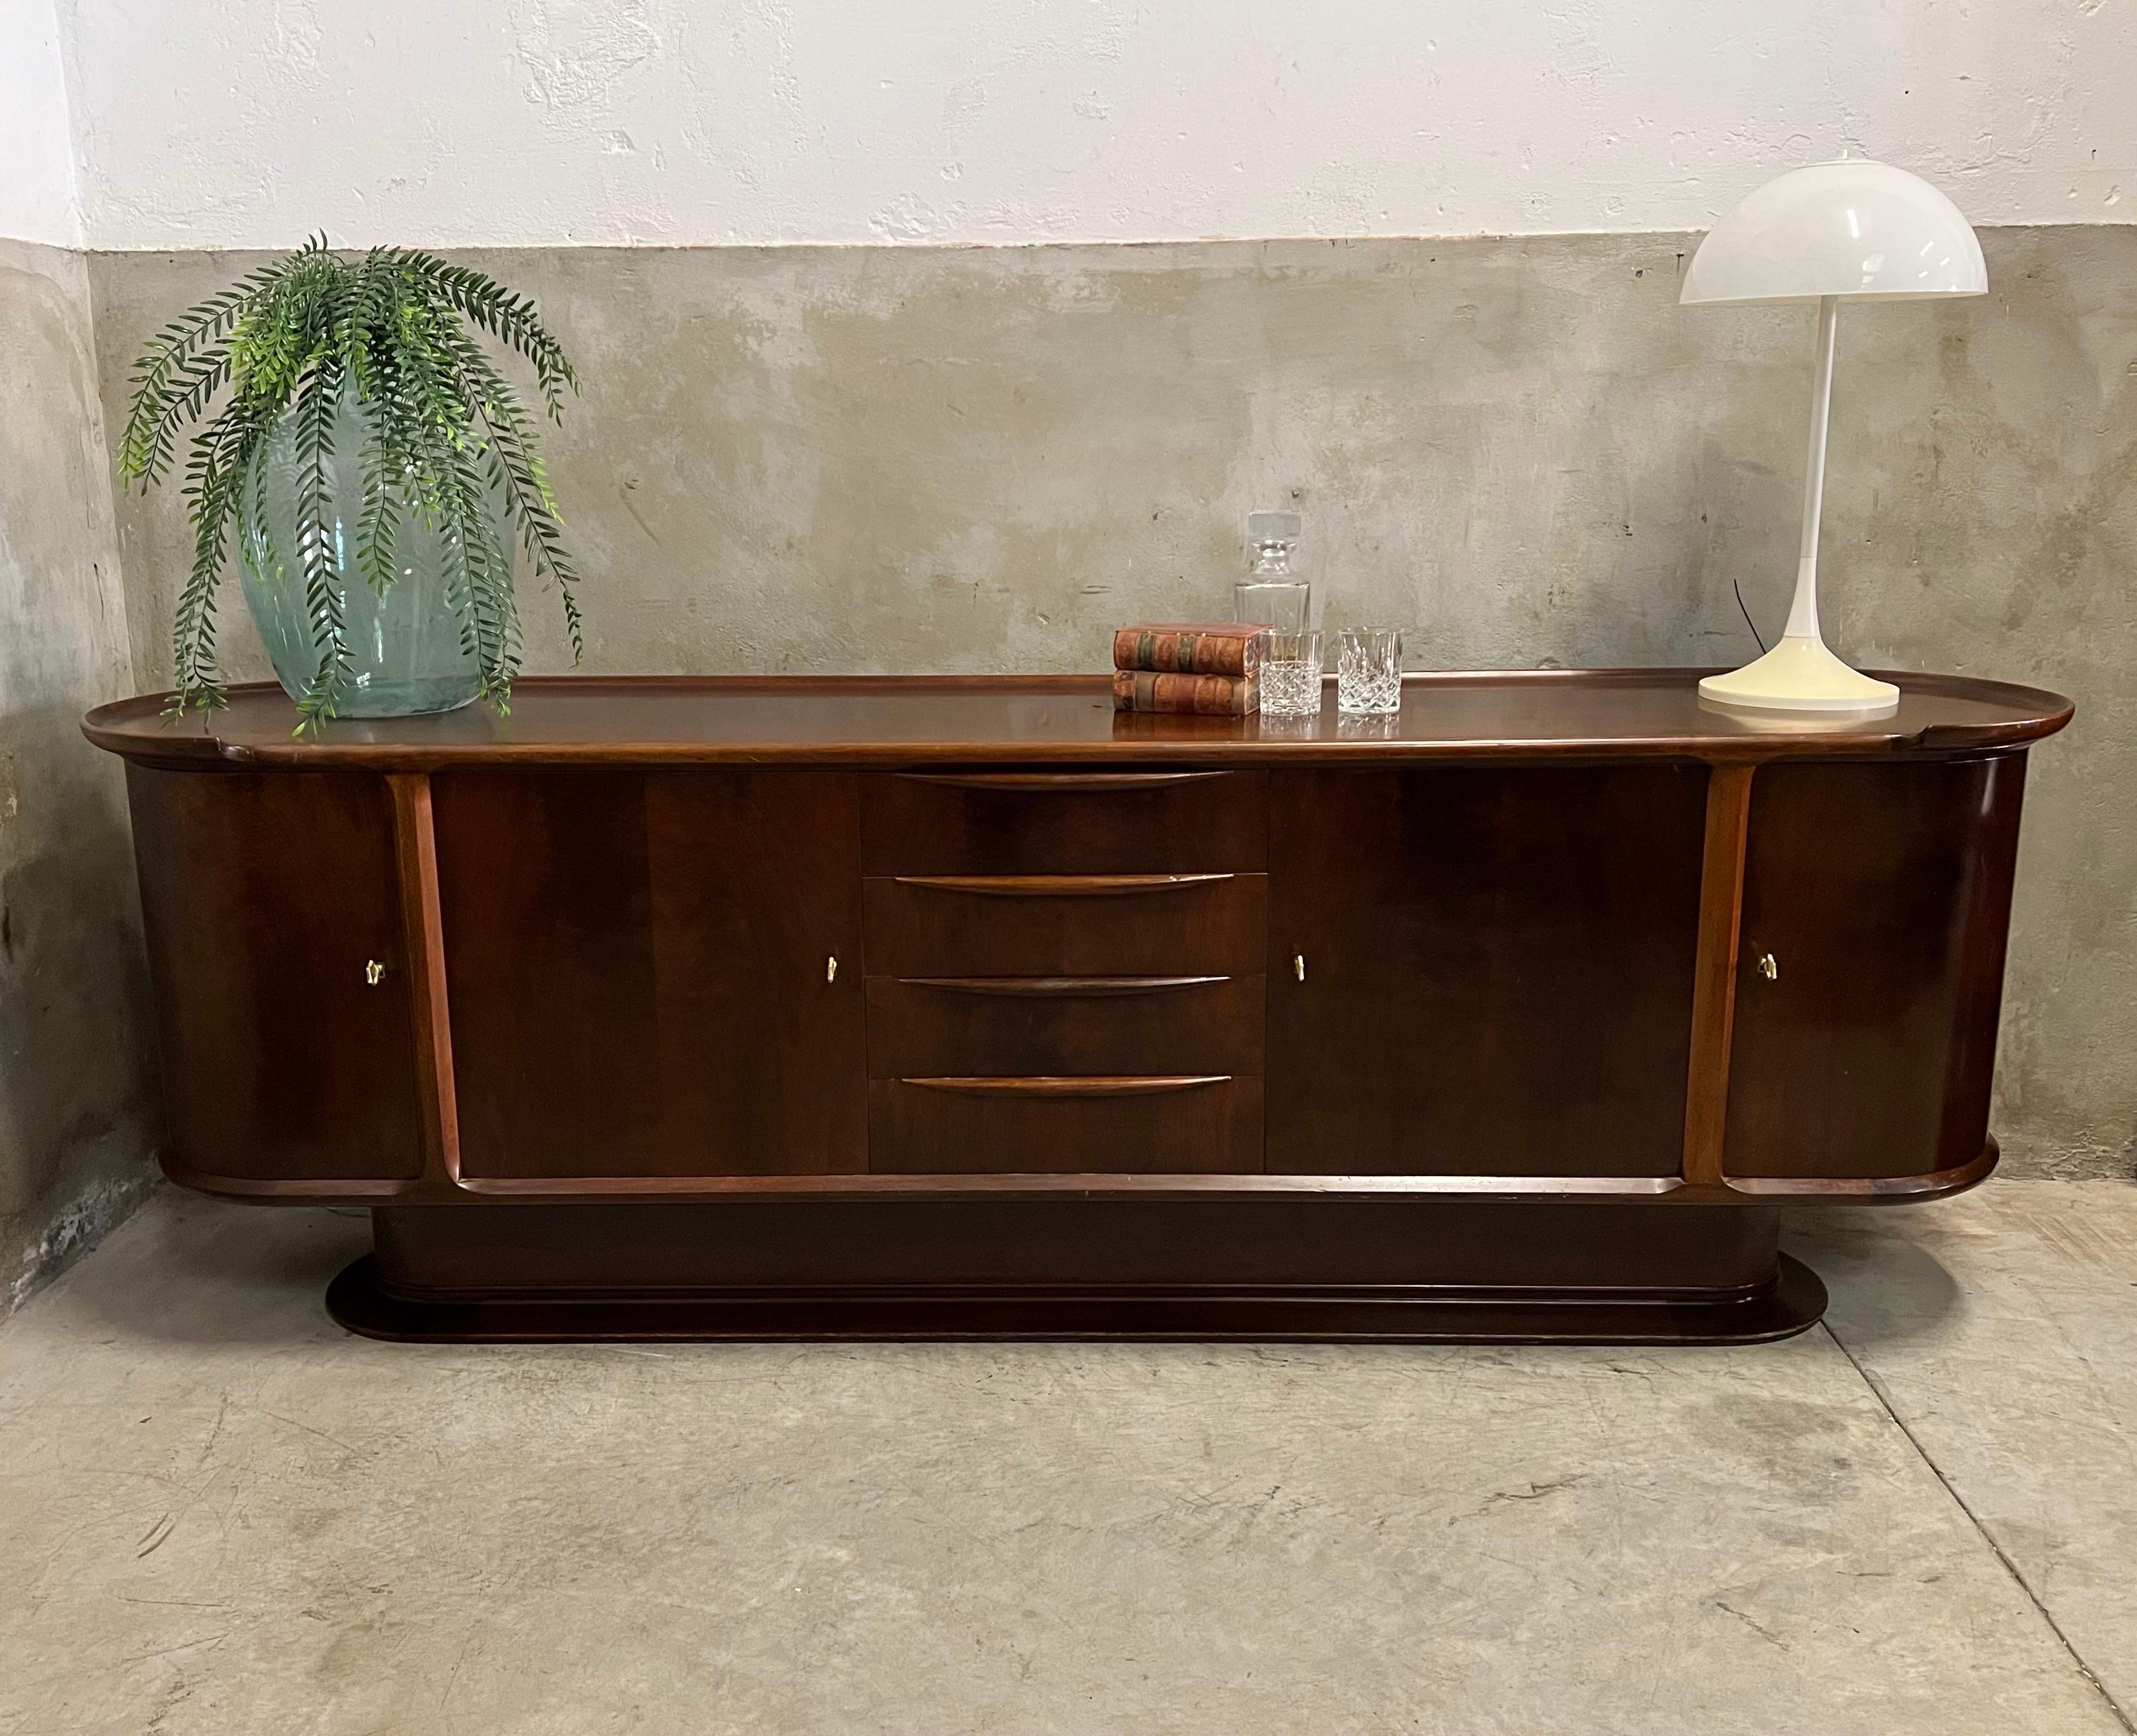 Dutch Mid-20th Century, Top Quality A.A. Patijn Sideboard from the 1950s for Zijlstra